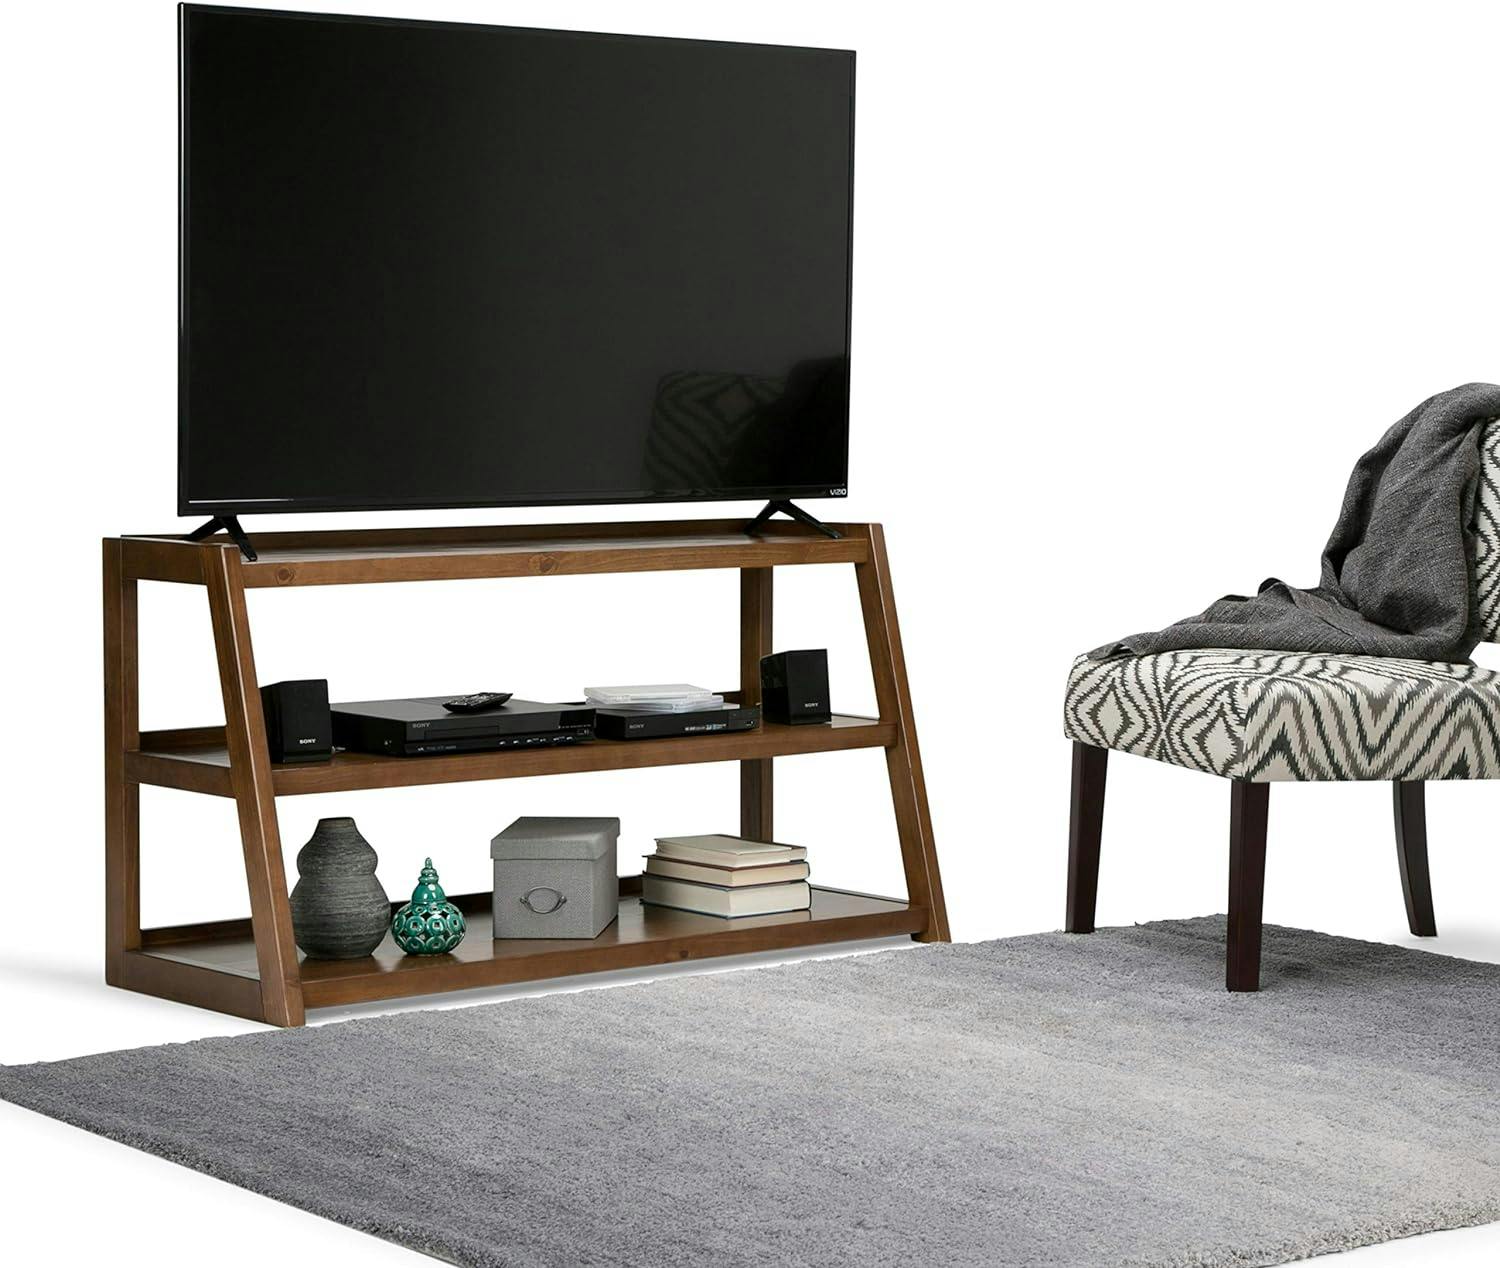 Rustic Medium Saddle Brown Solid Pine TV Stand for 55" TVs